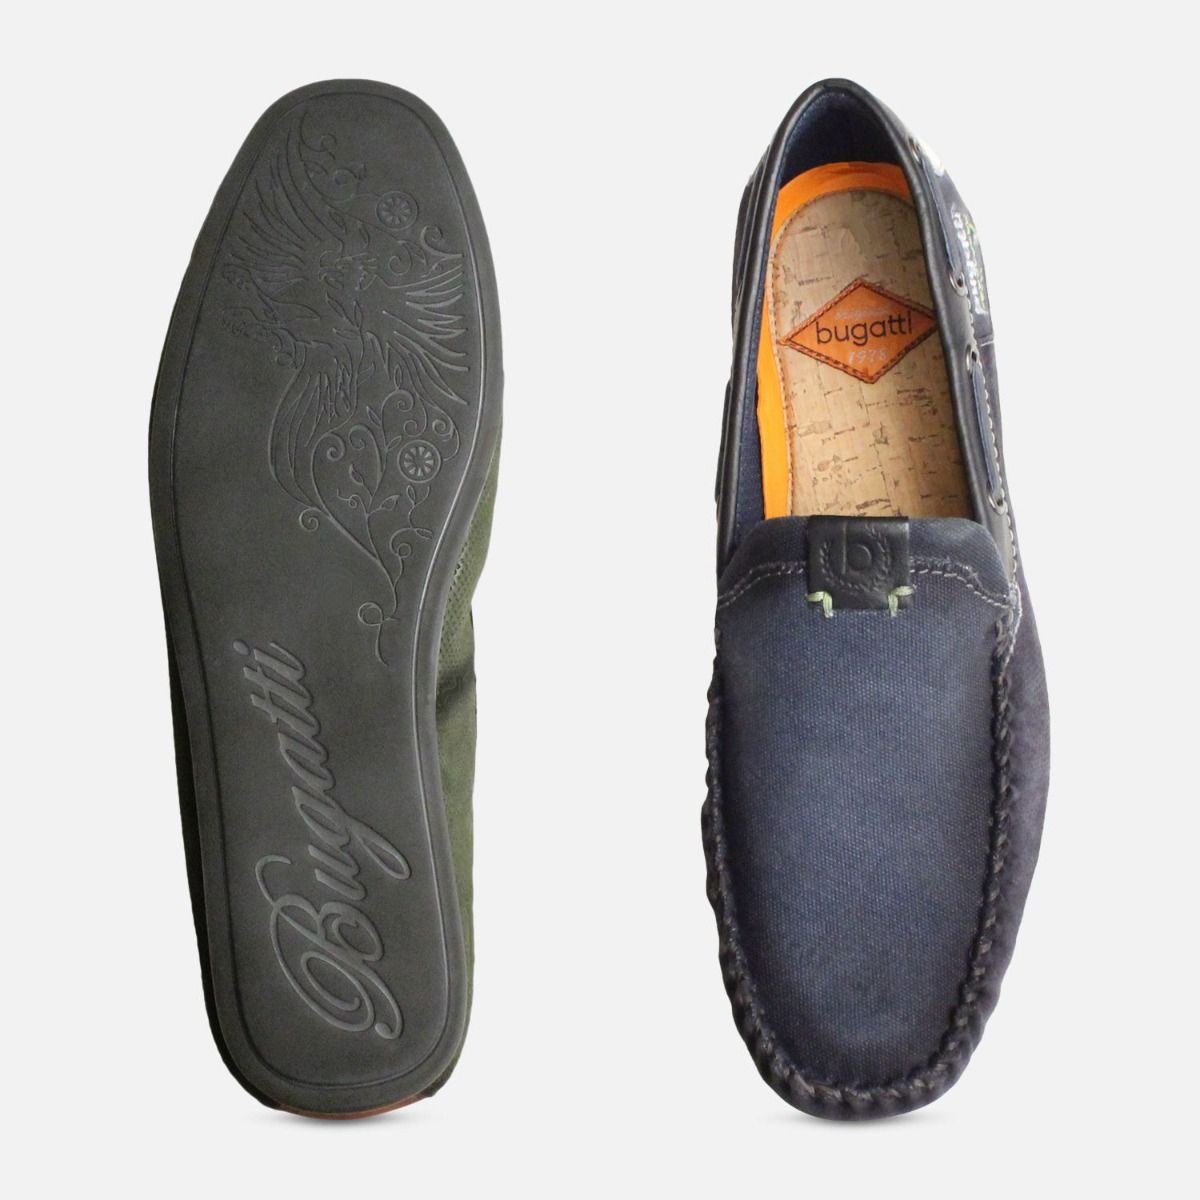 Smoked Bugatti Loafers in Navy Blue Canvas